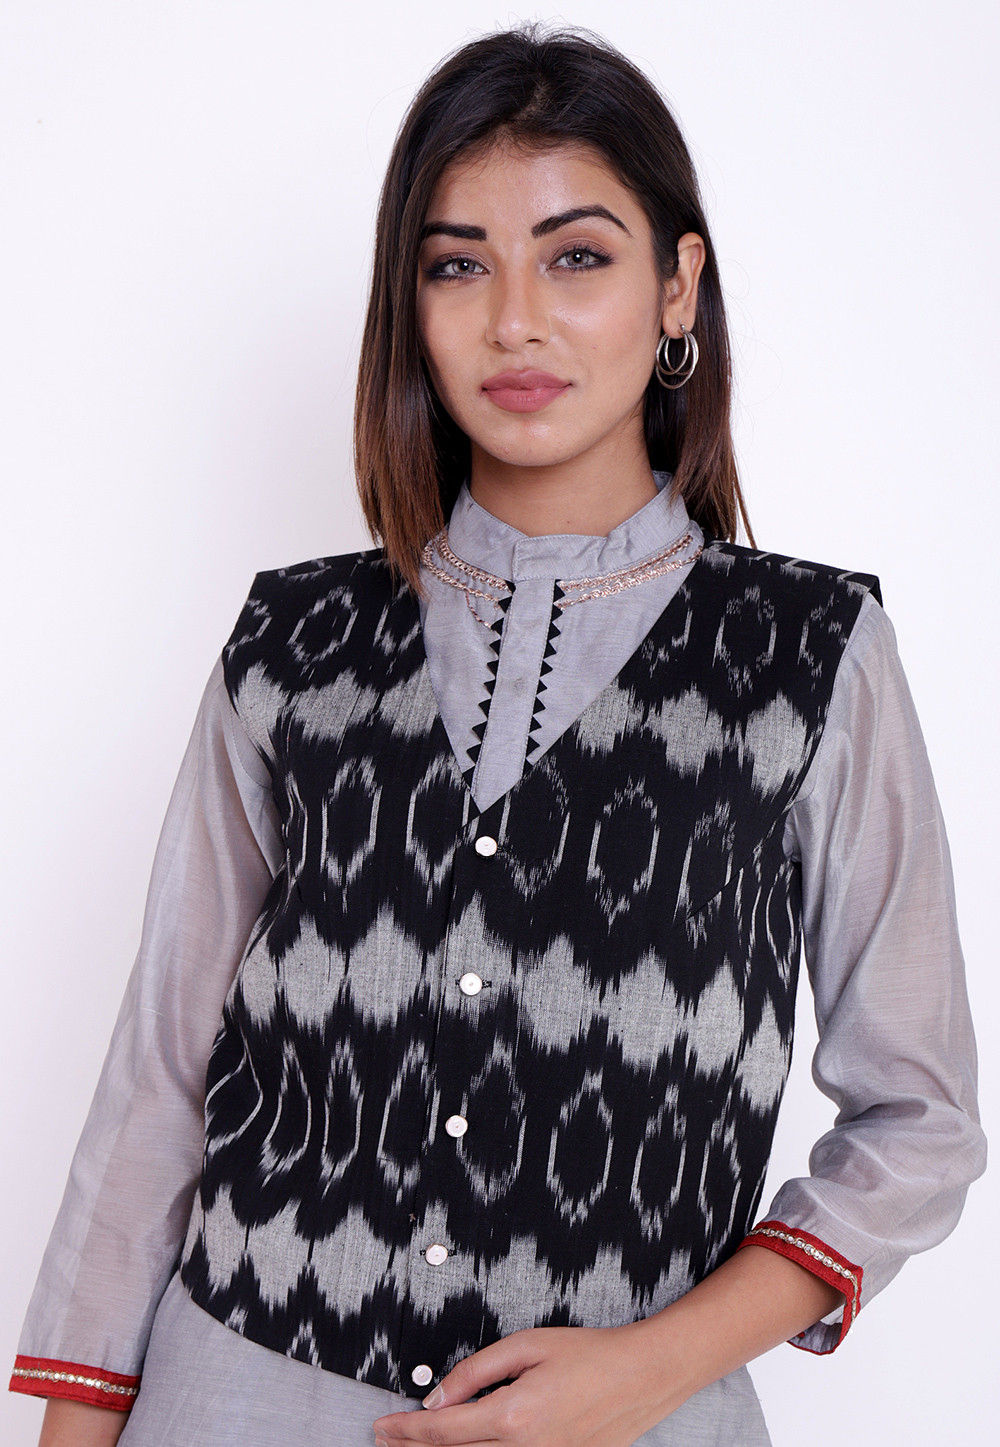 Ikat Woven Cotton Jacket in Black and Grey : TJW1414